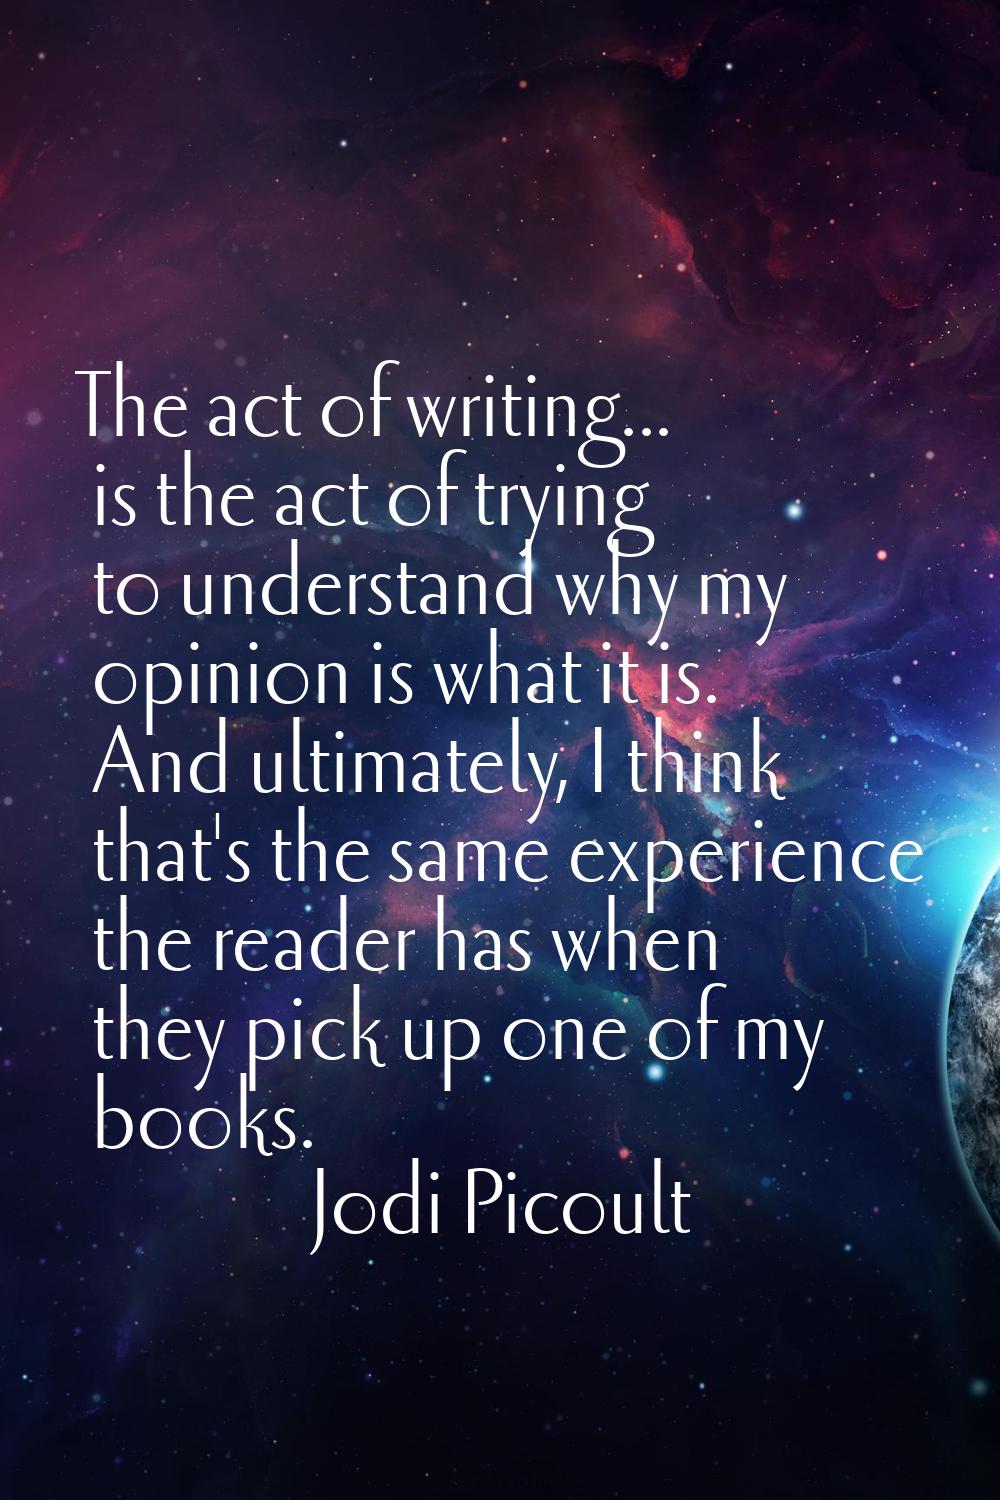 The act of writing... is the act of trying to understand why my opinion is what it is. And ultimate